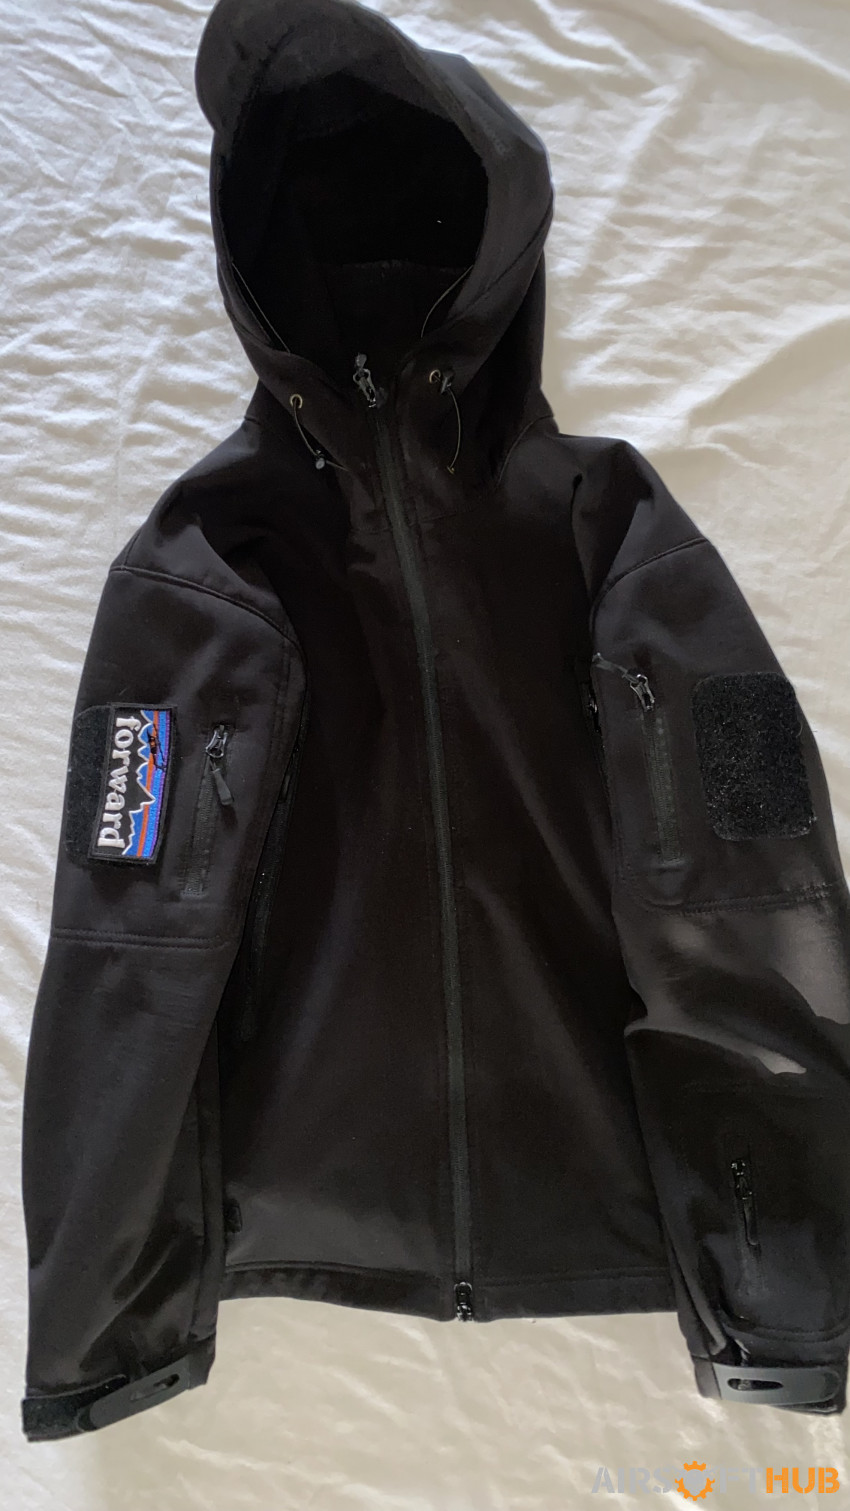 Softshell All-weather jacket - Used airsoft equipment